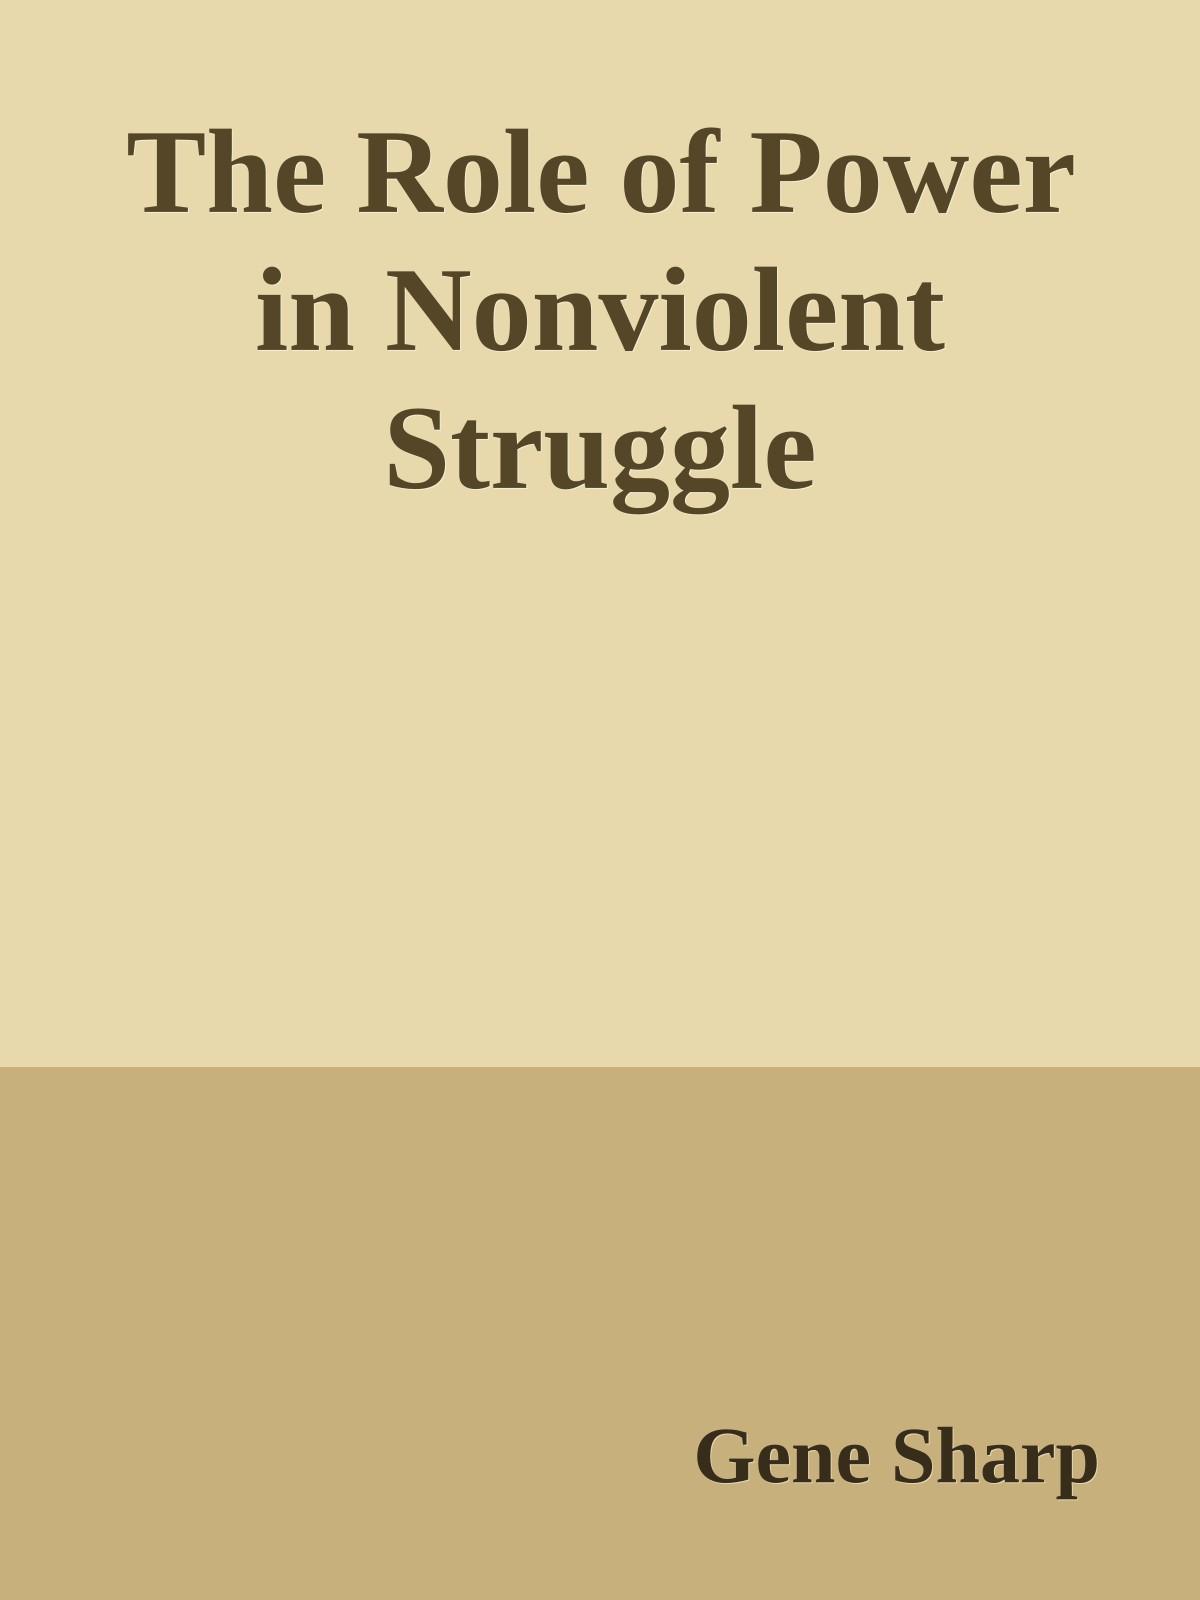 The Role of Power in Nonviolent Struggle (1990) by Gene Sharp